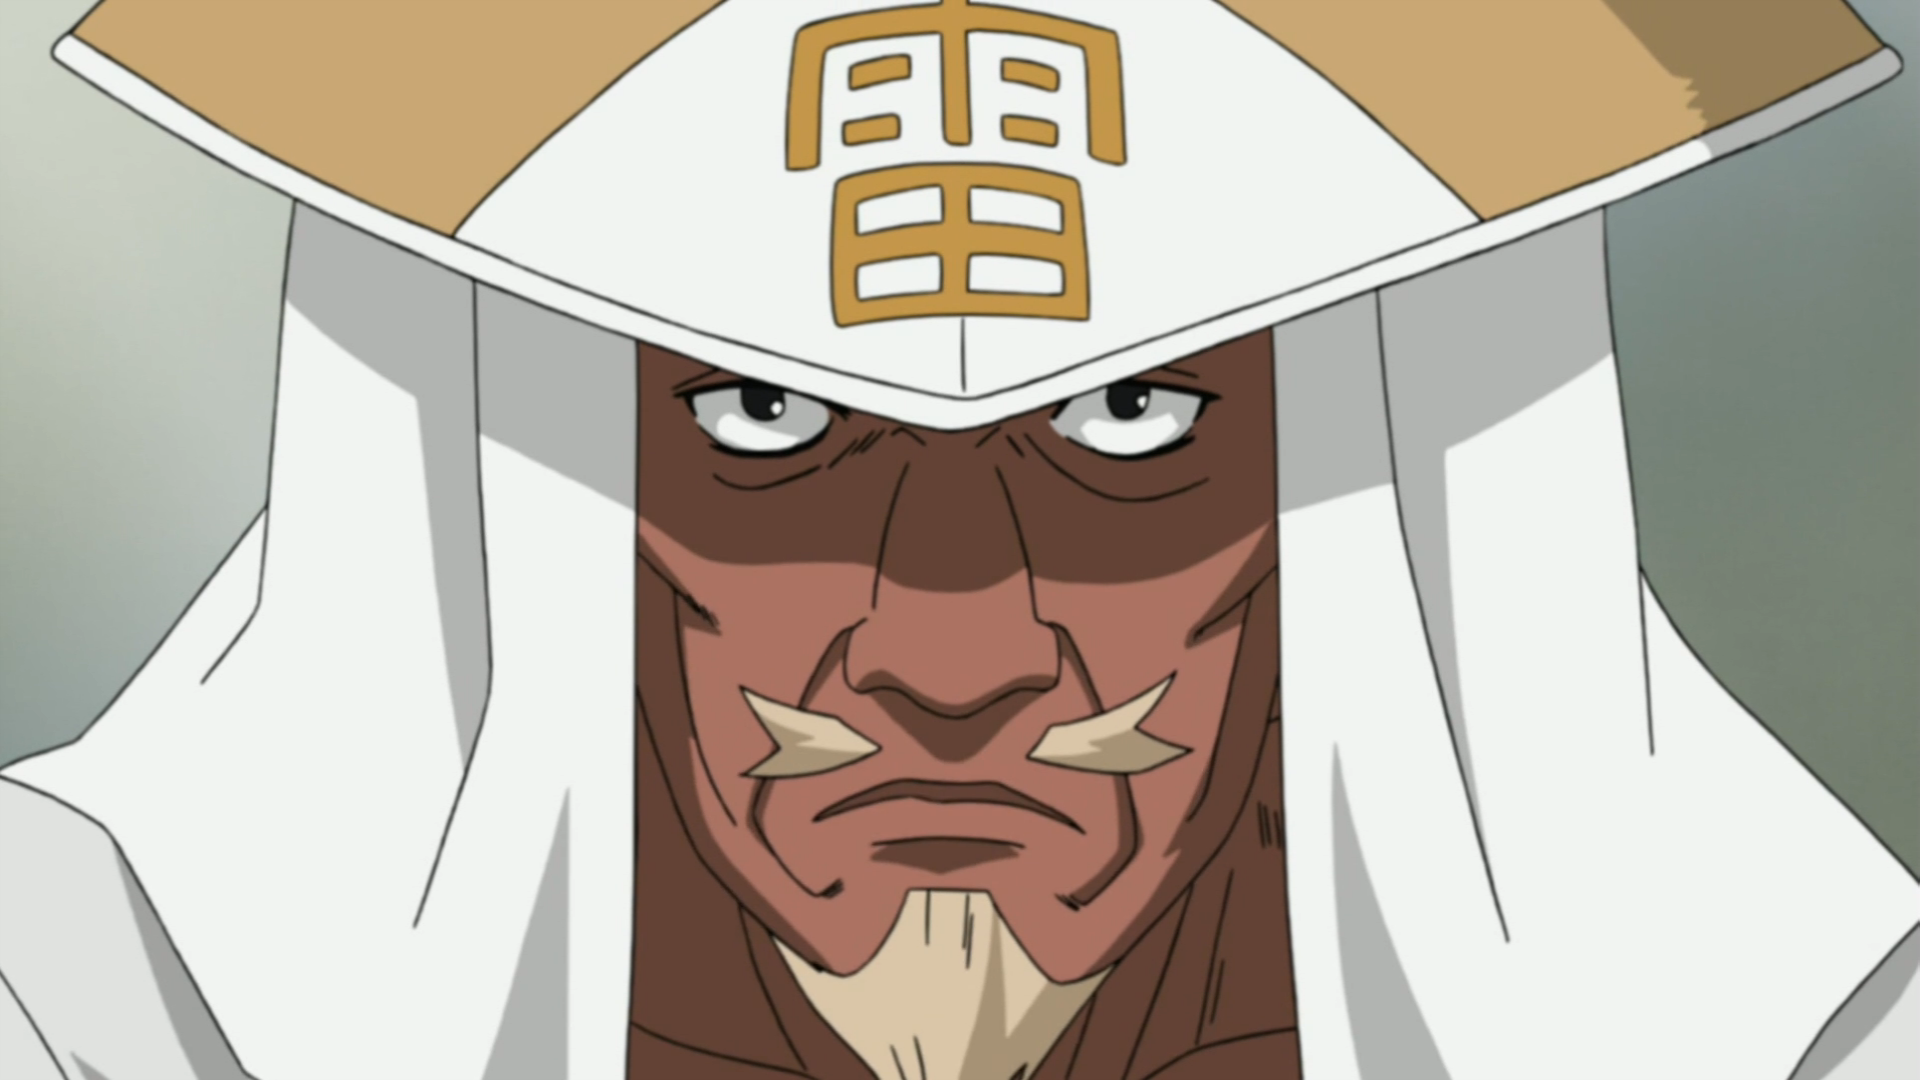 http://images2.wikia.nocookie.net/__cb20120729084022/naruto/images/6/6f/A.PNG